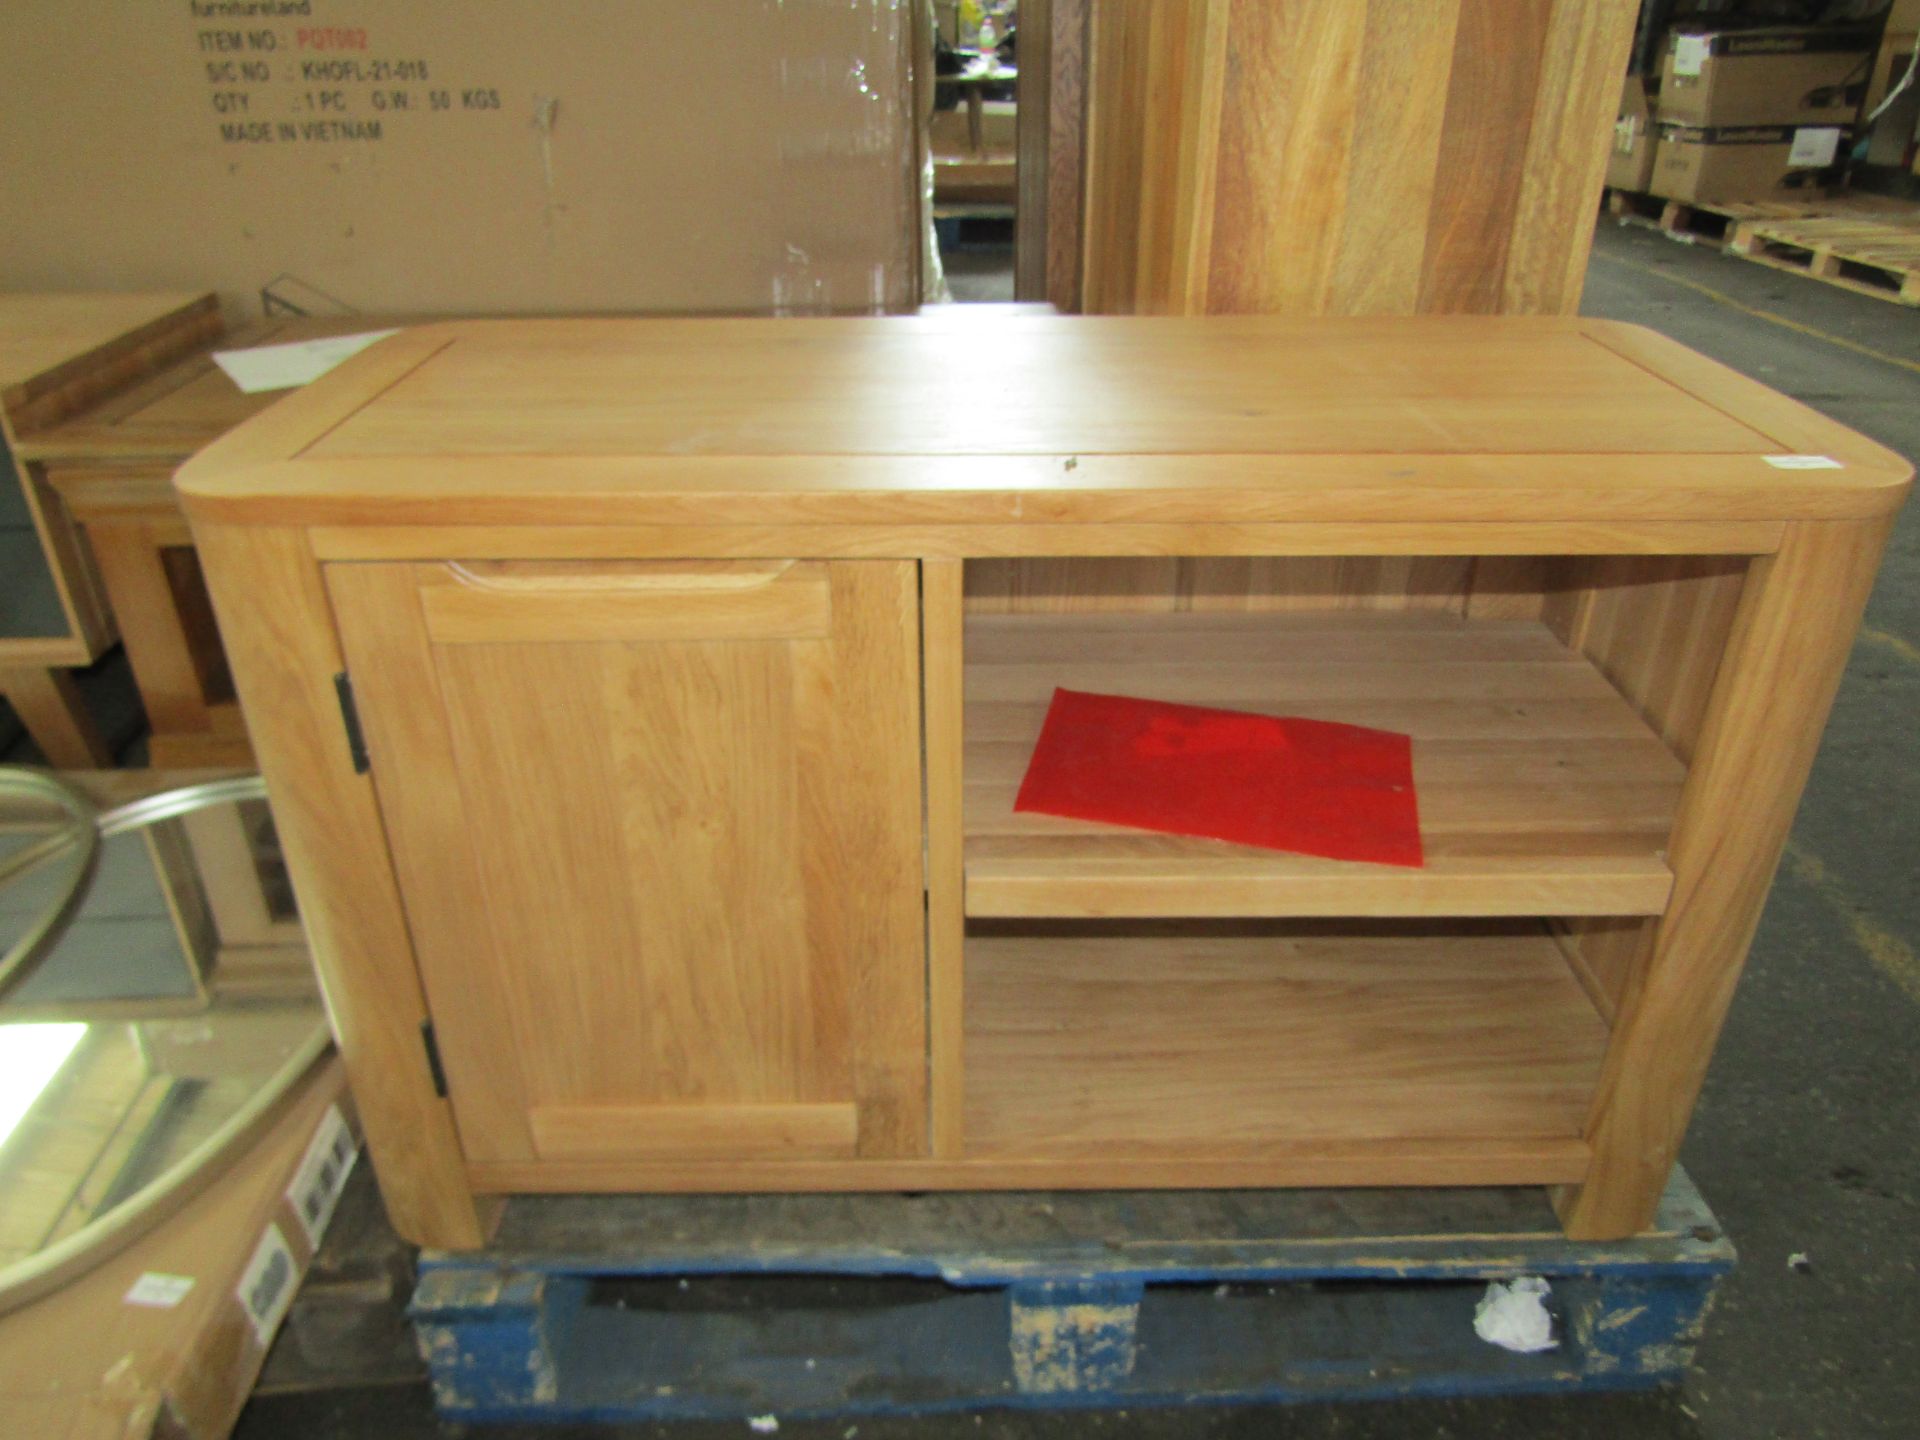 Oak Furnitureland Romsey Natural Solid Oak Small Tv Unit RRP 299.99 The Romsey small TV cabinet is